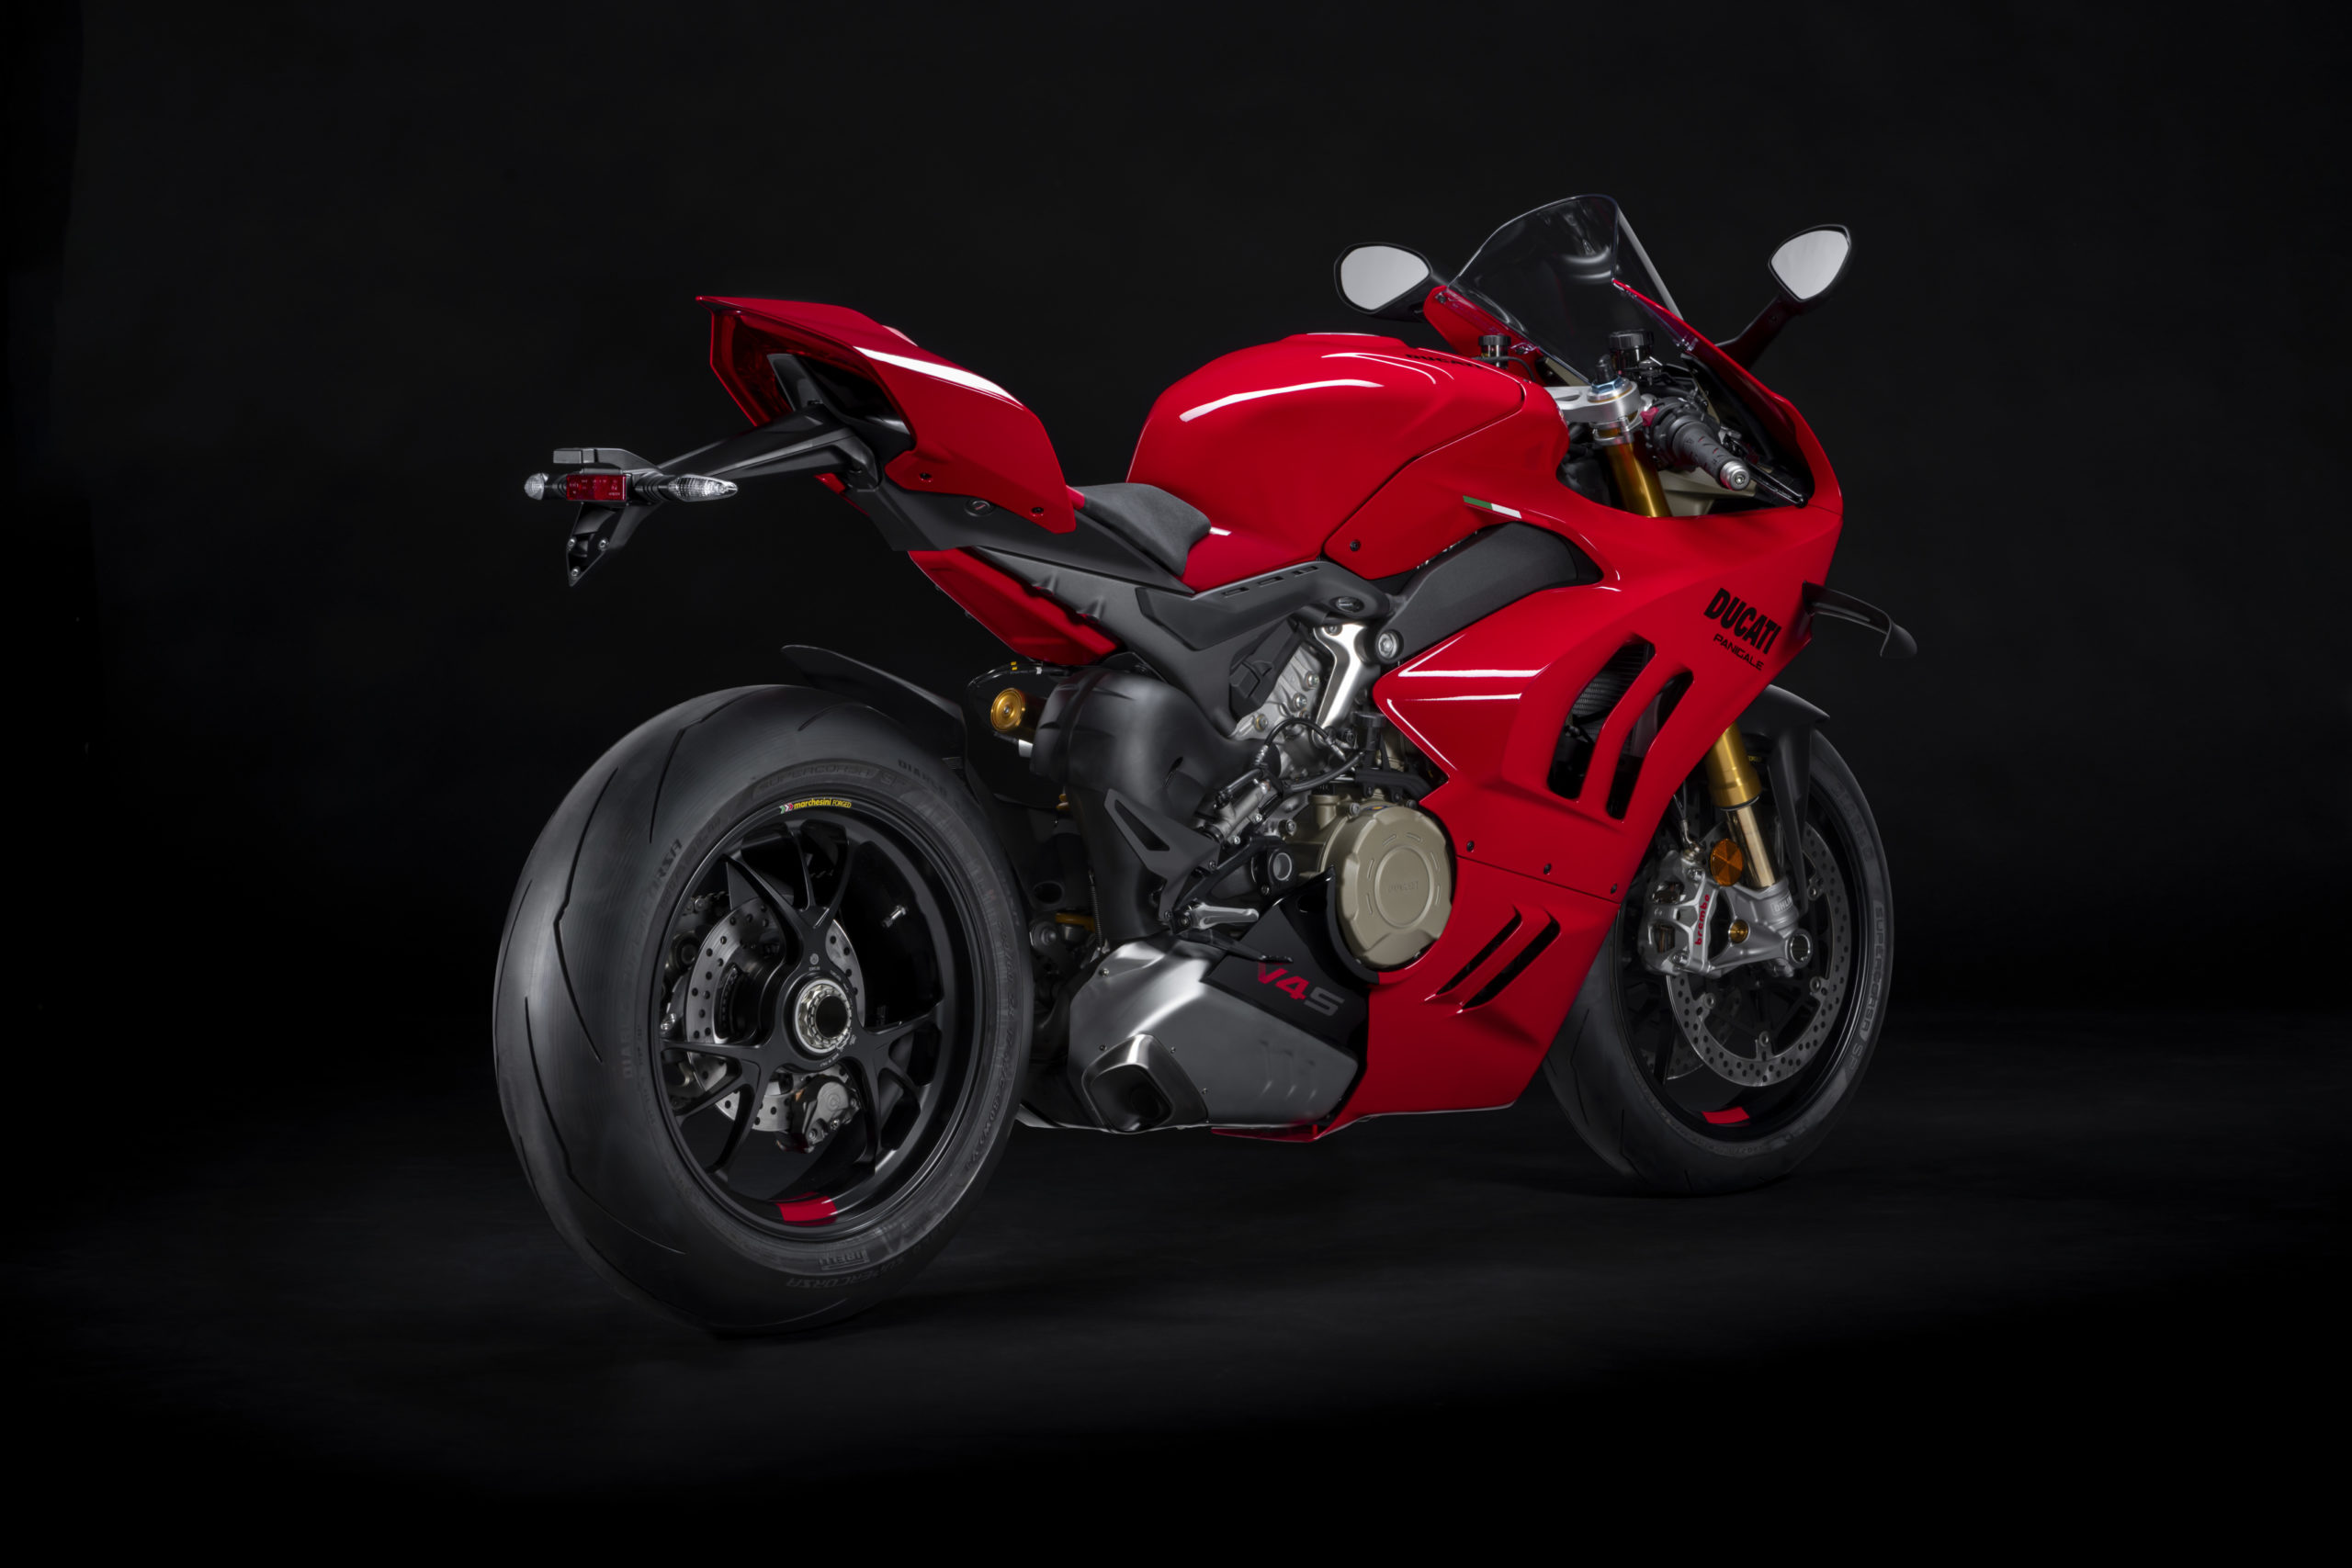 Ducati's new 2022 Panigale V4 and V4 S